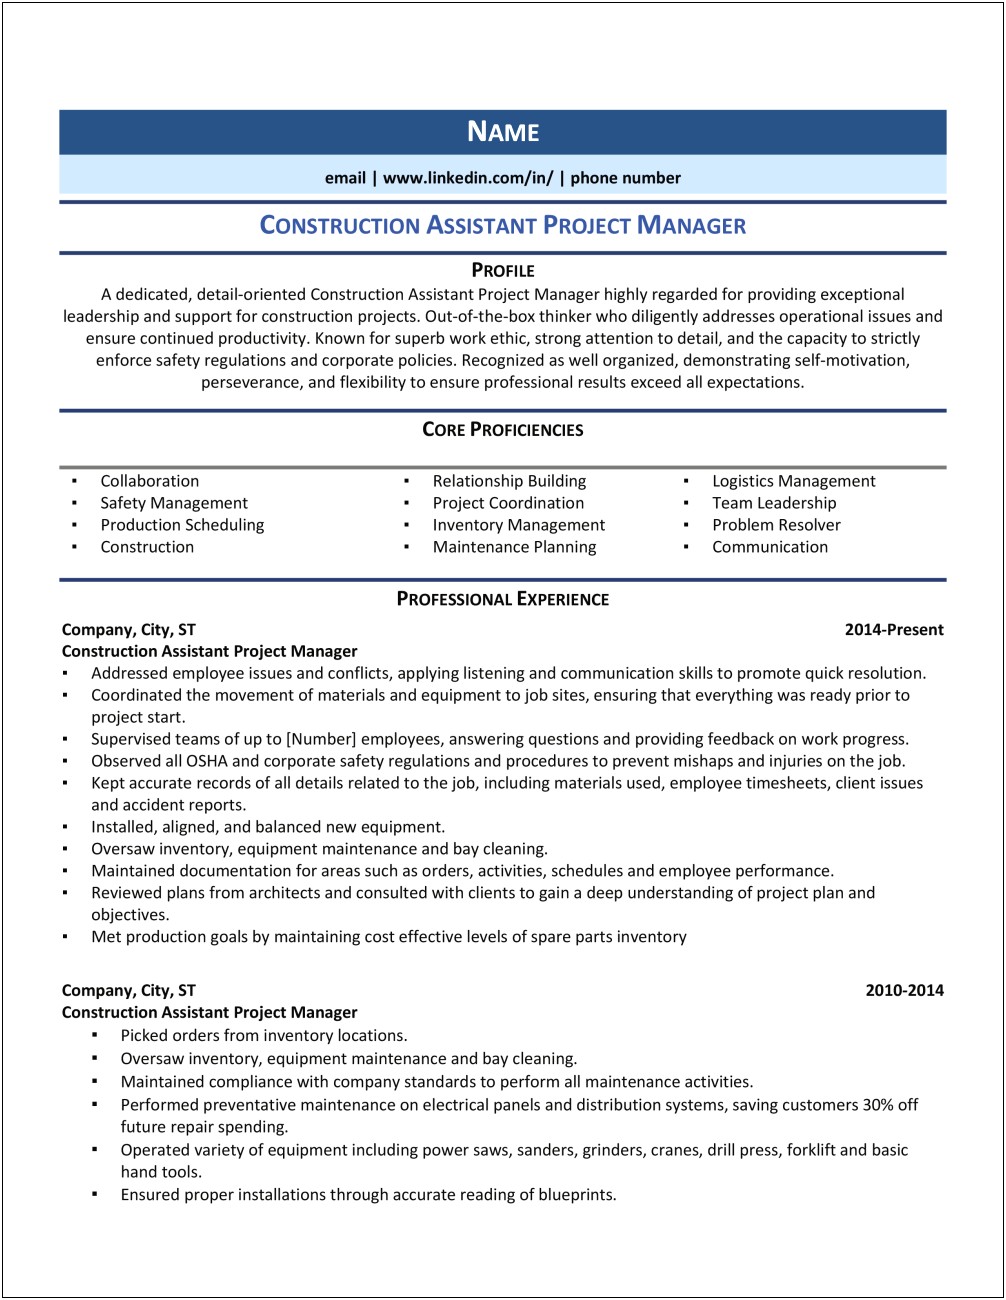 Free Resume Templates For Construction Project Manager